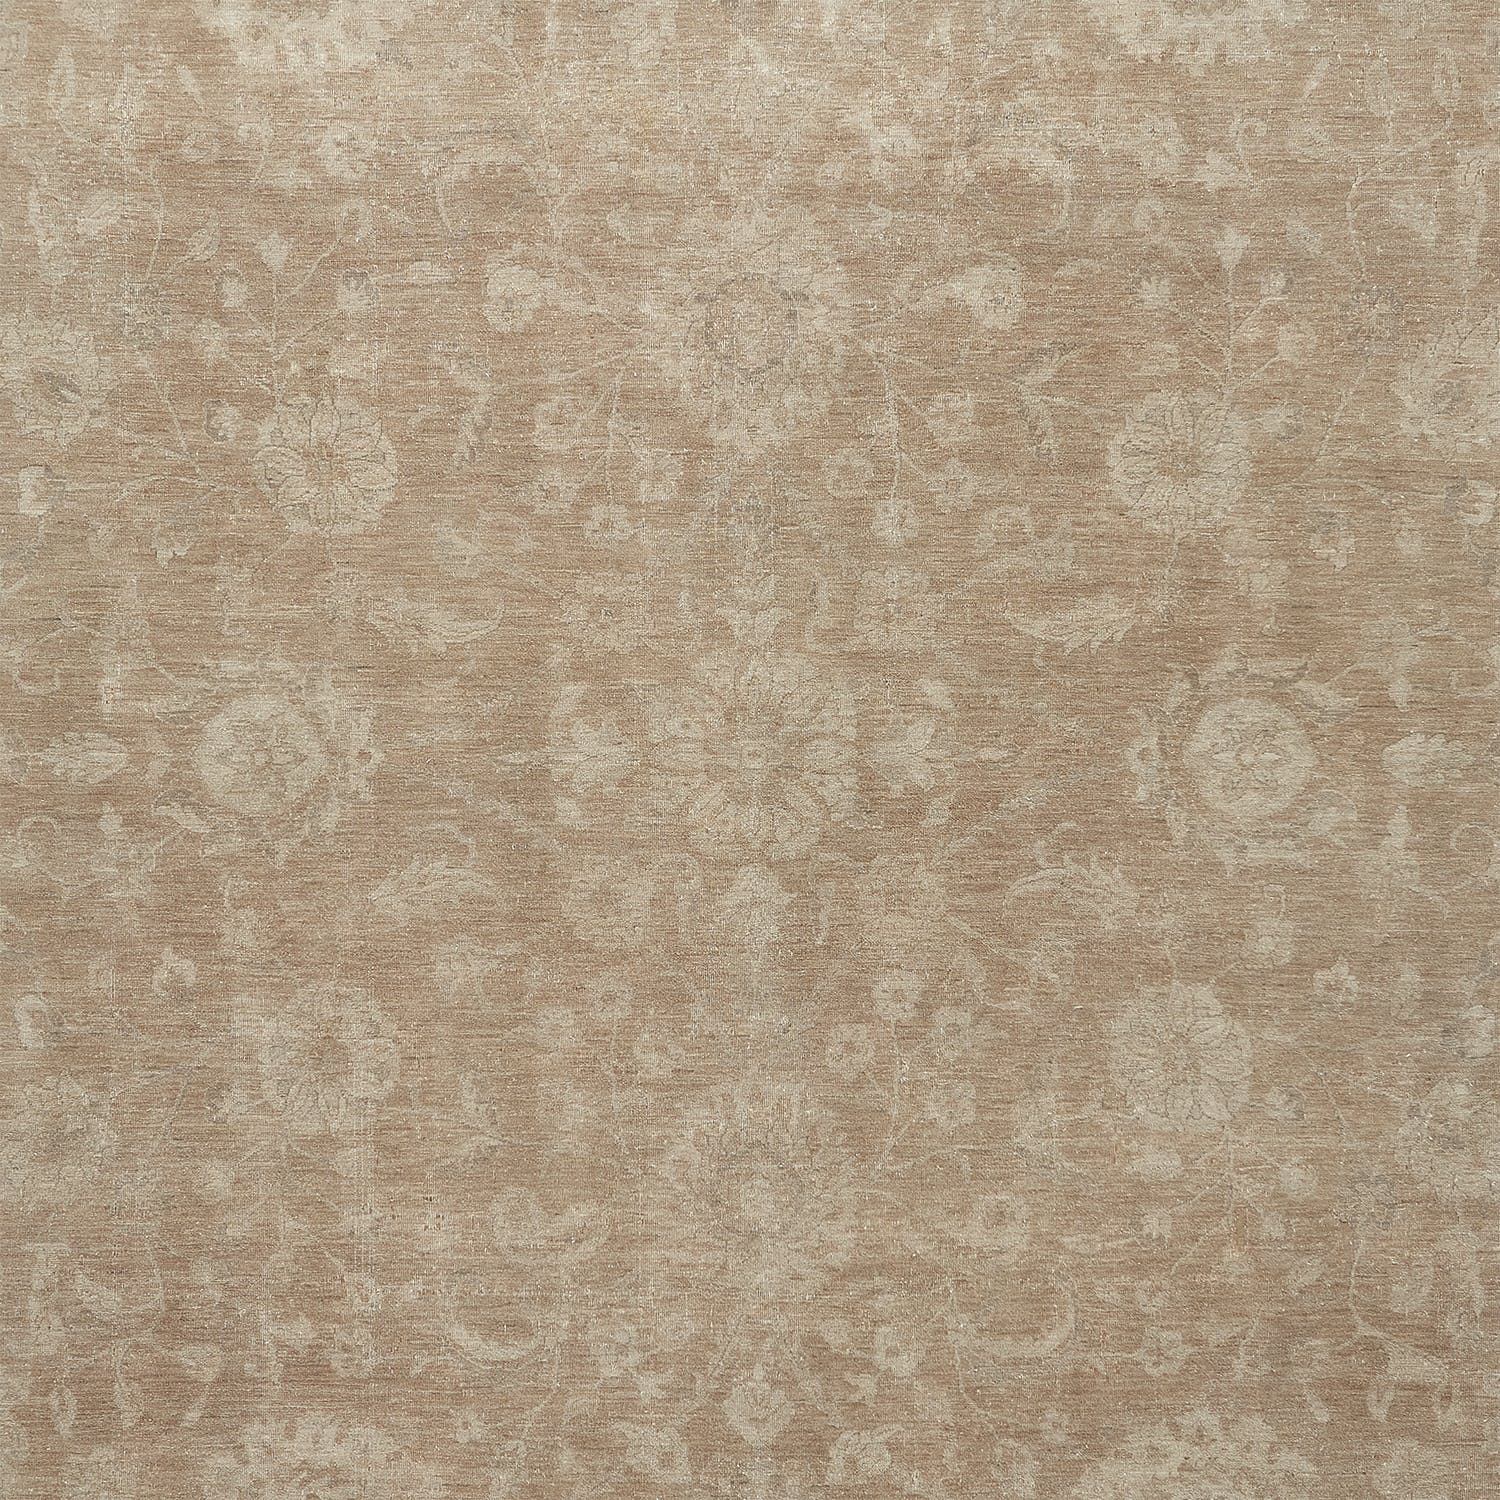 Symmetrical and ornate floral patterned fabric in muted beige color.